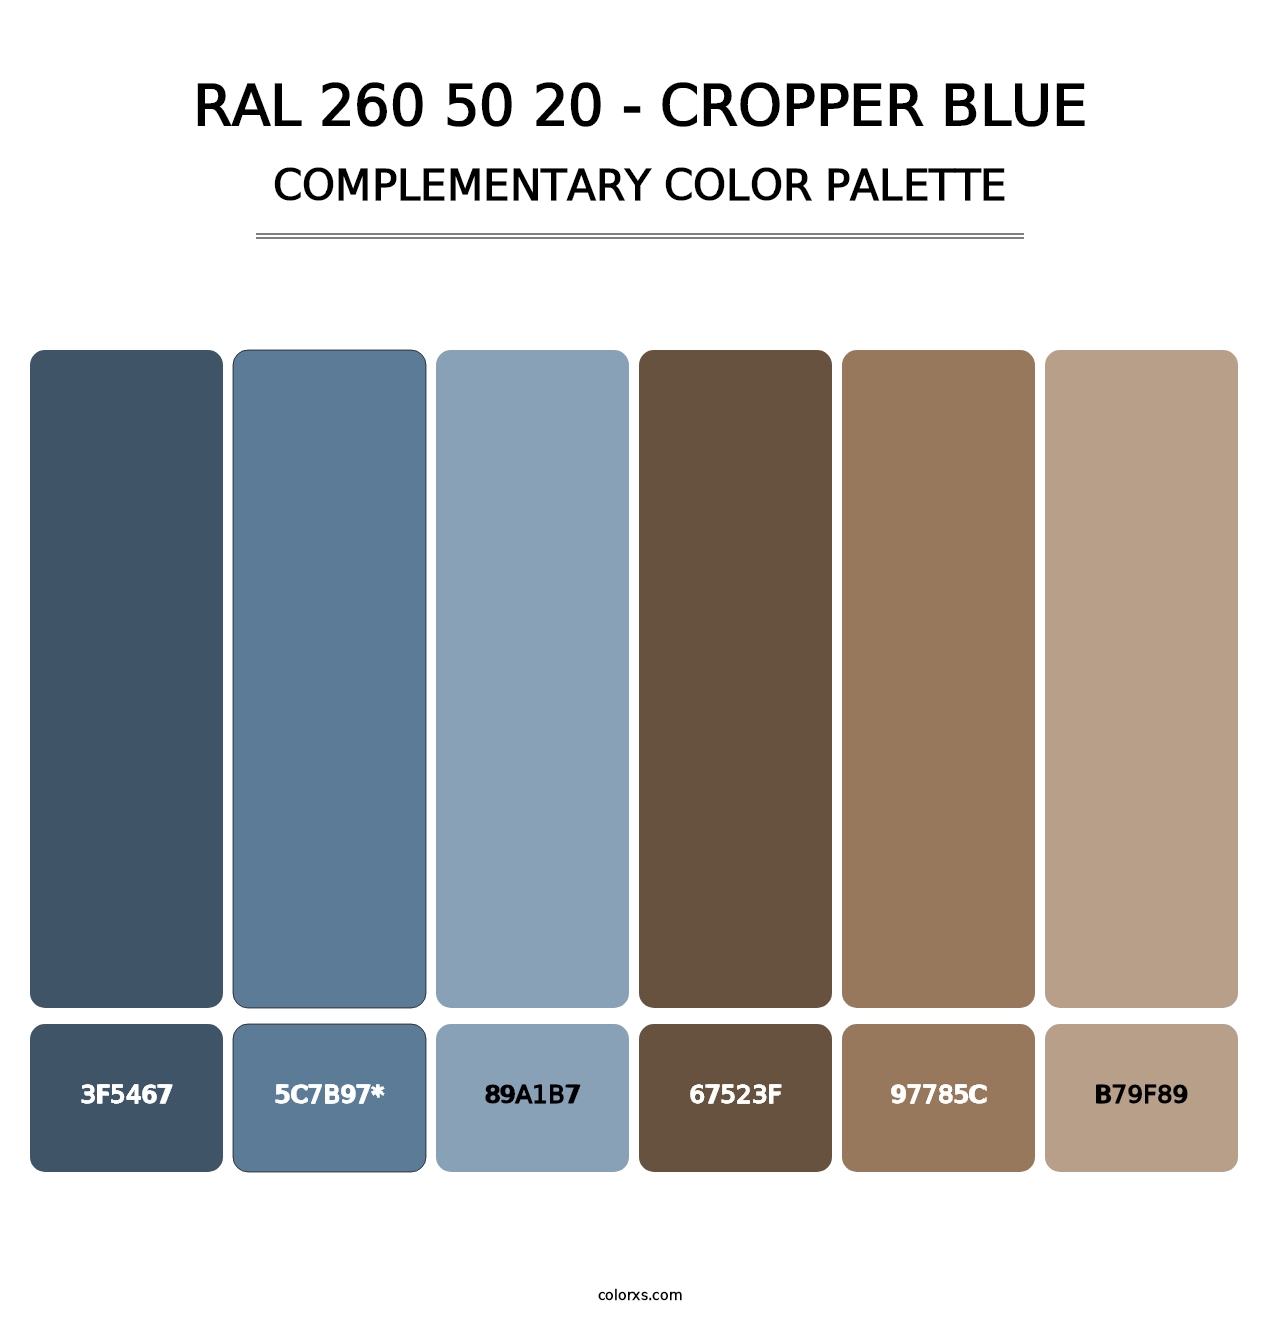 RAL 260 50 20 - Cropper Blue - Complementary Color Palette